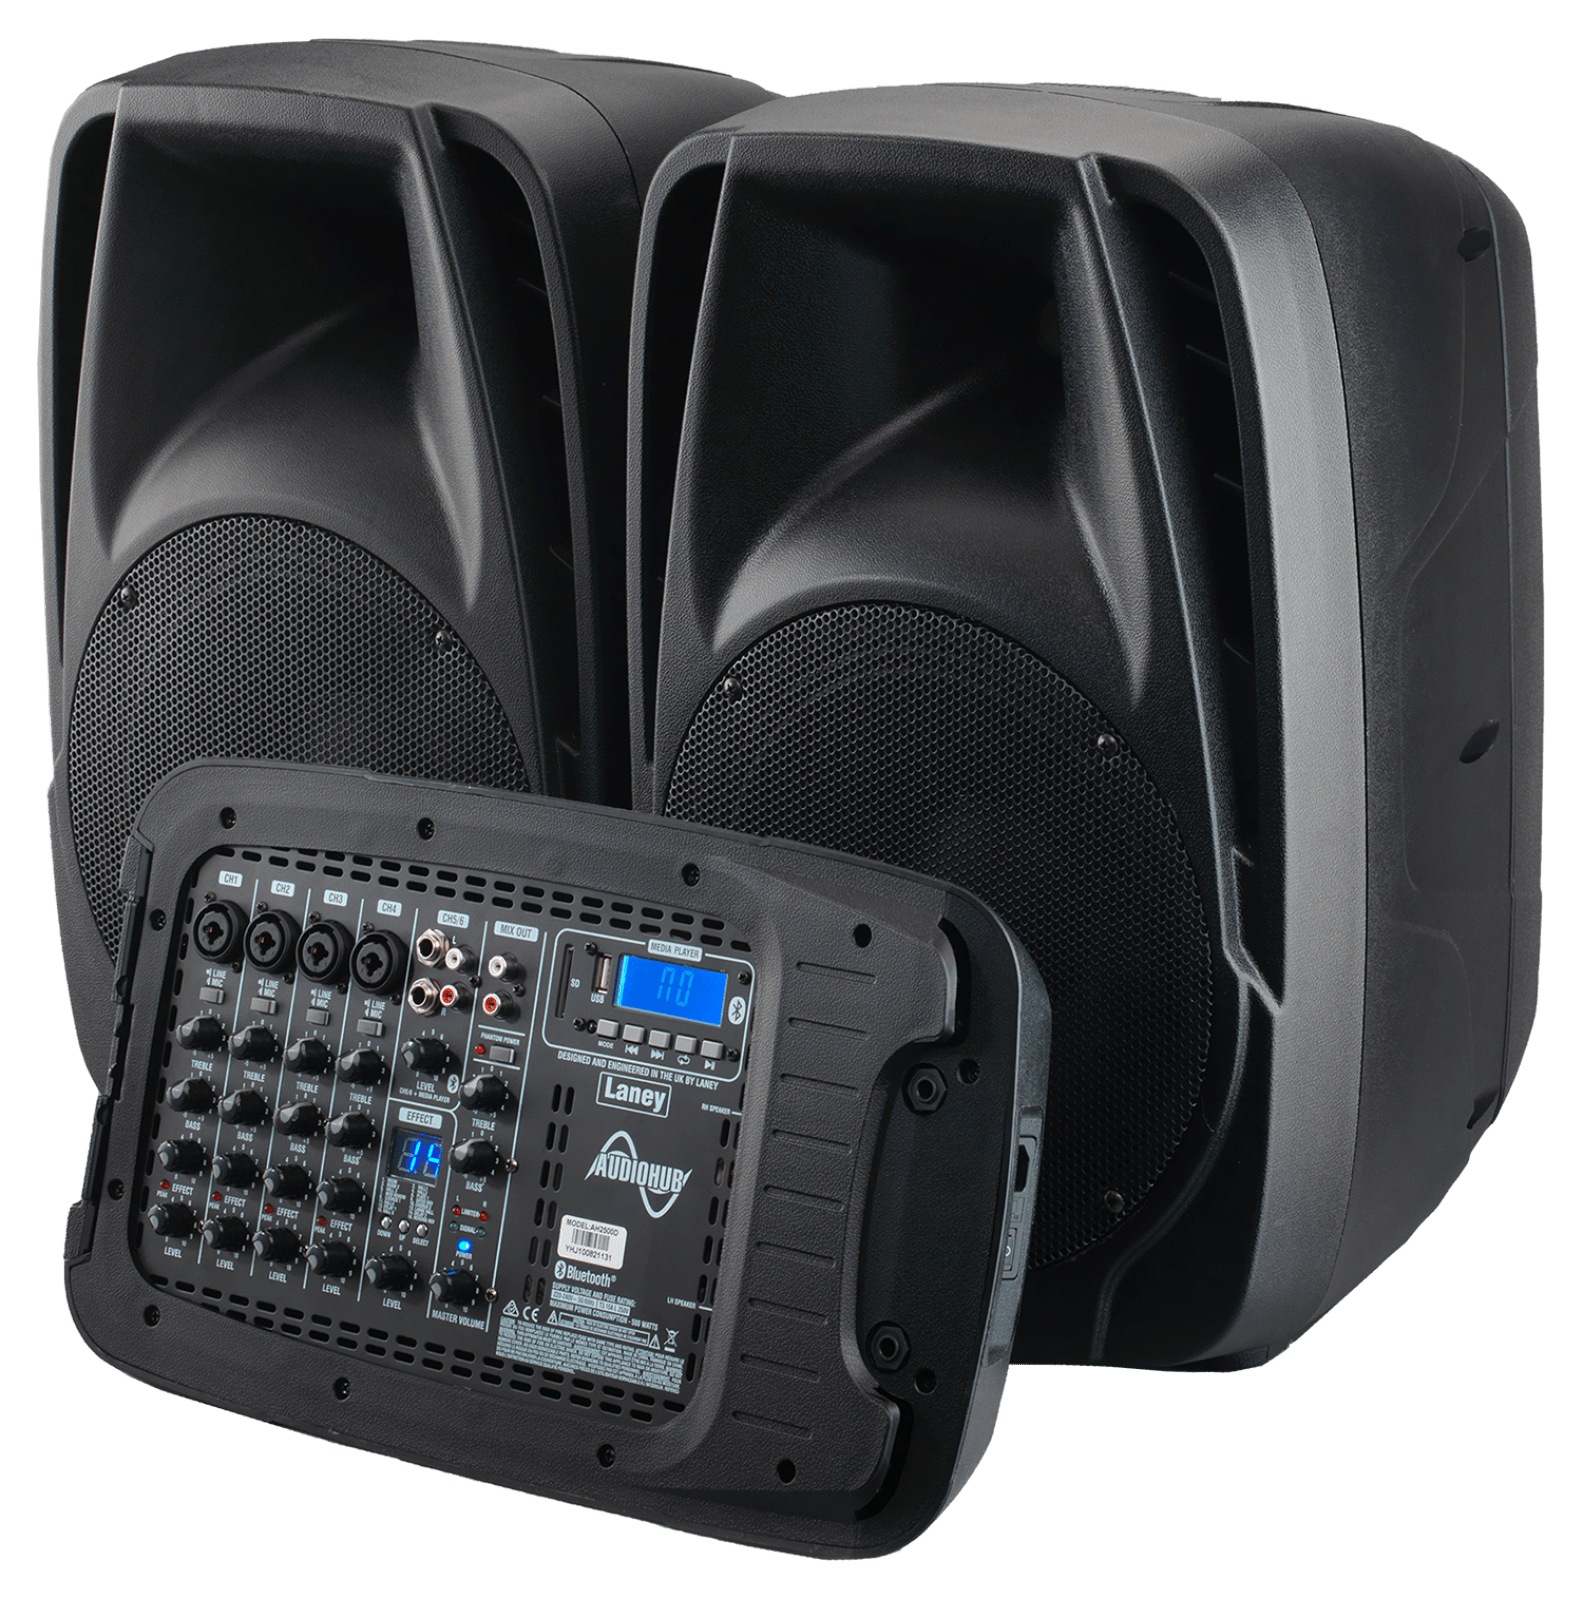 Laney UK AH2500D Portable PA System. Best for DJ Events, Schools & Corporate Events.